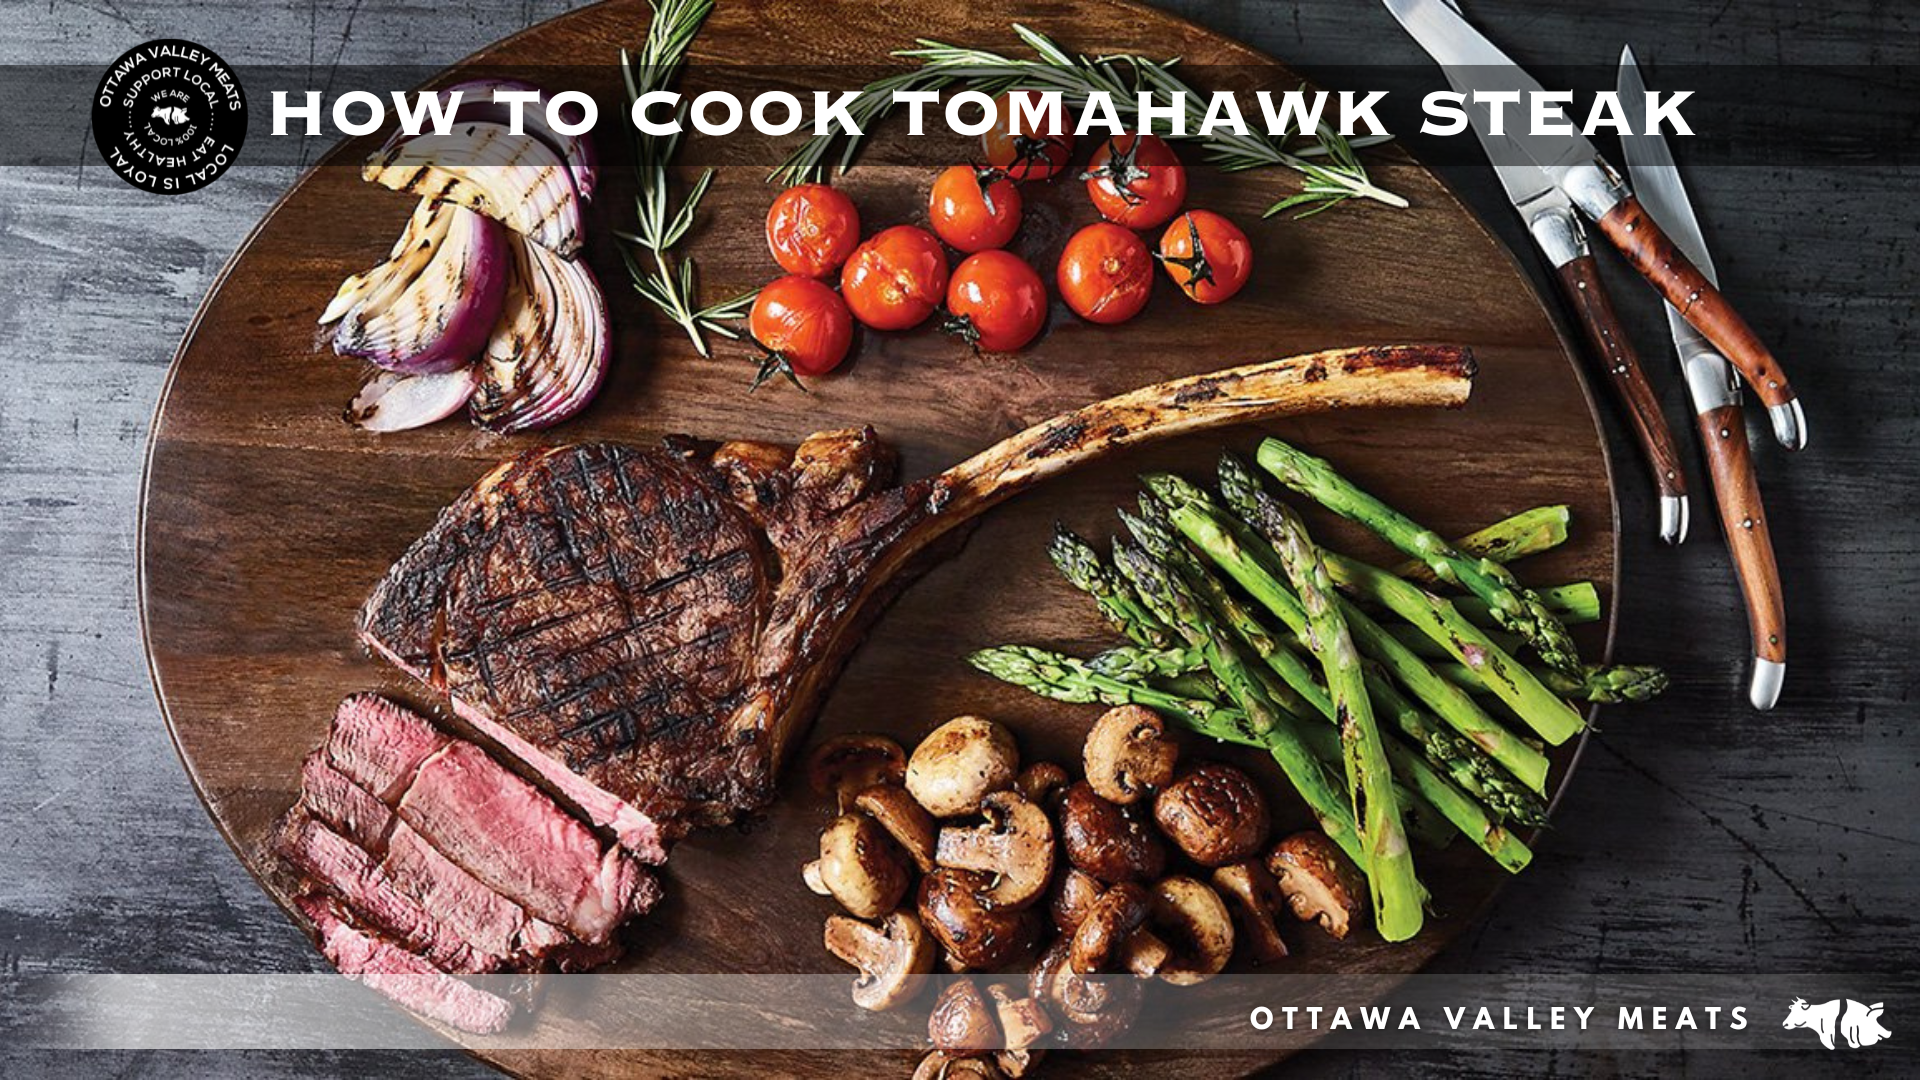 How to Cook Tomahawk Steak